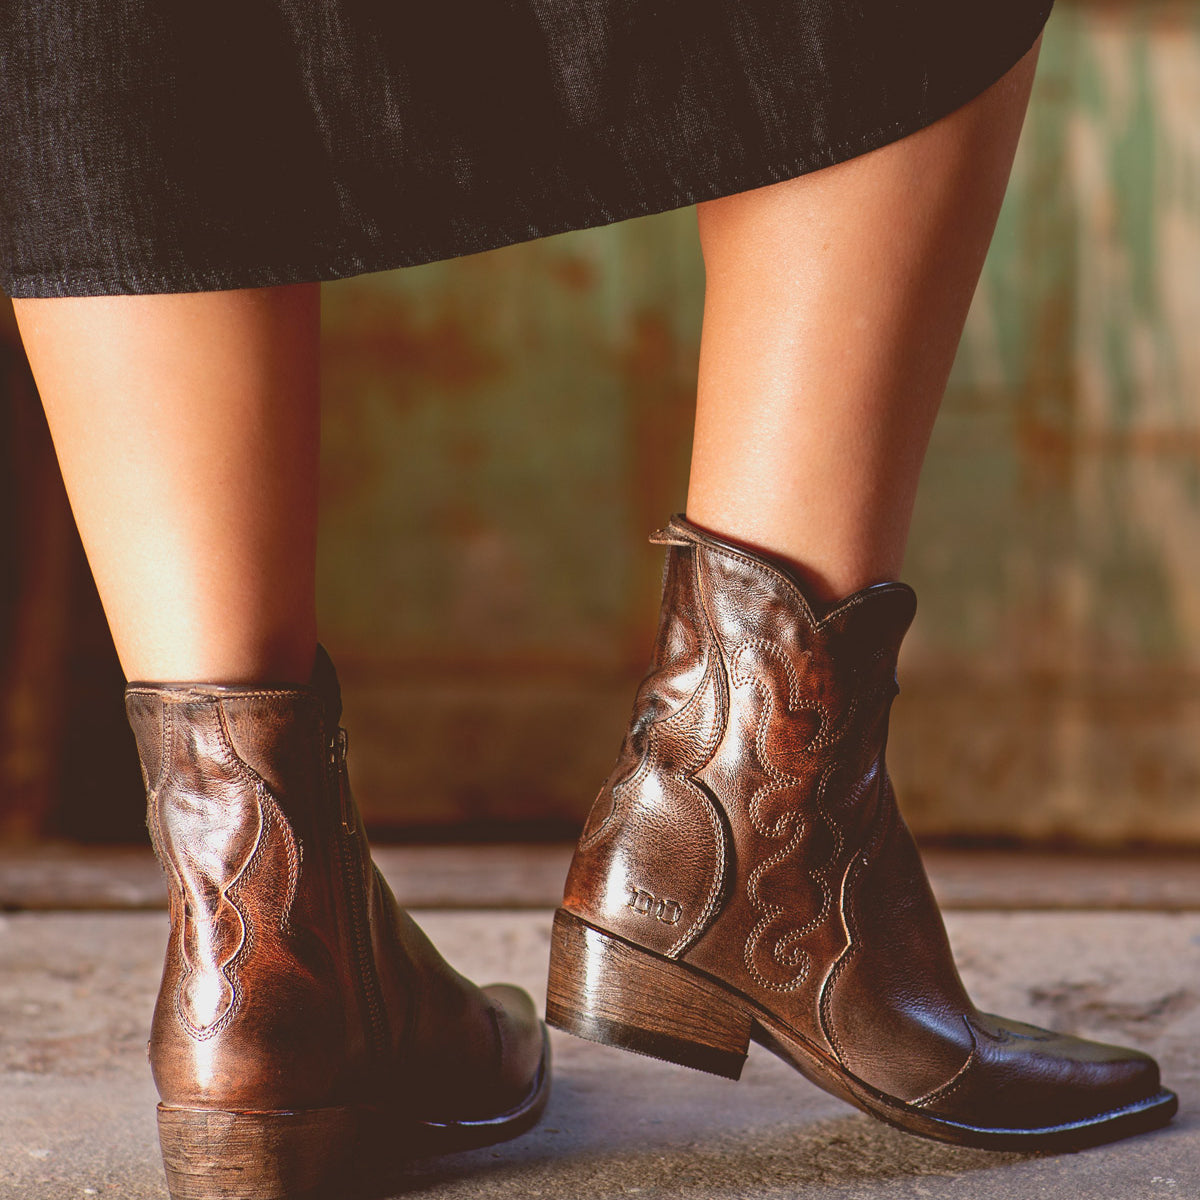 A woman sporting comfortable Ace leather cowboy boots with western style flair. (Brand Name: Bed Stu)